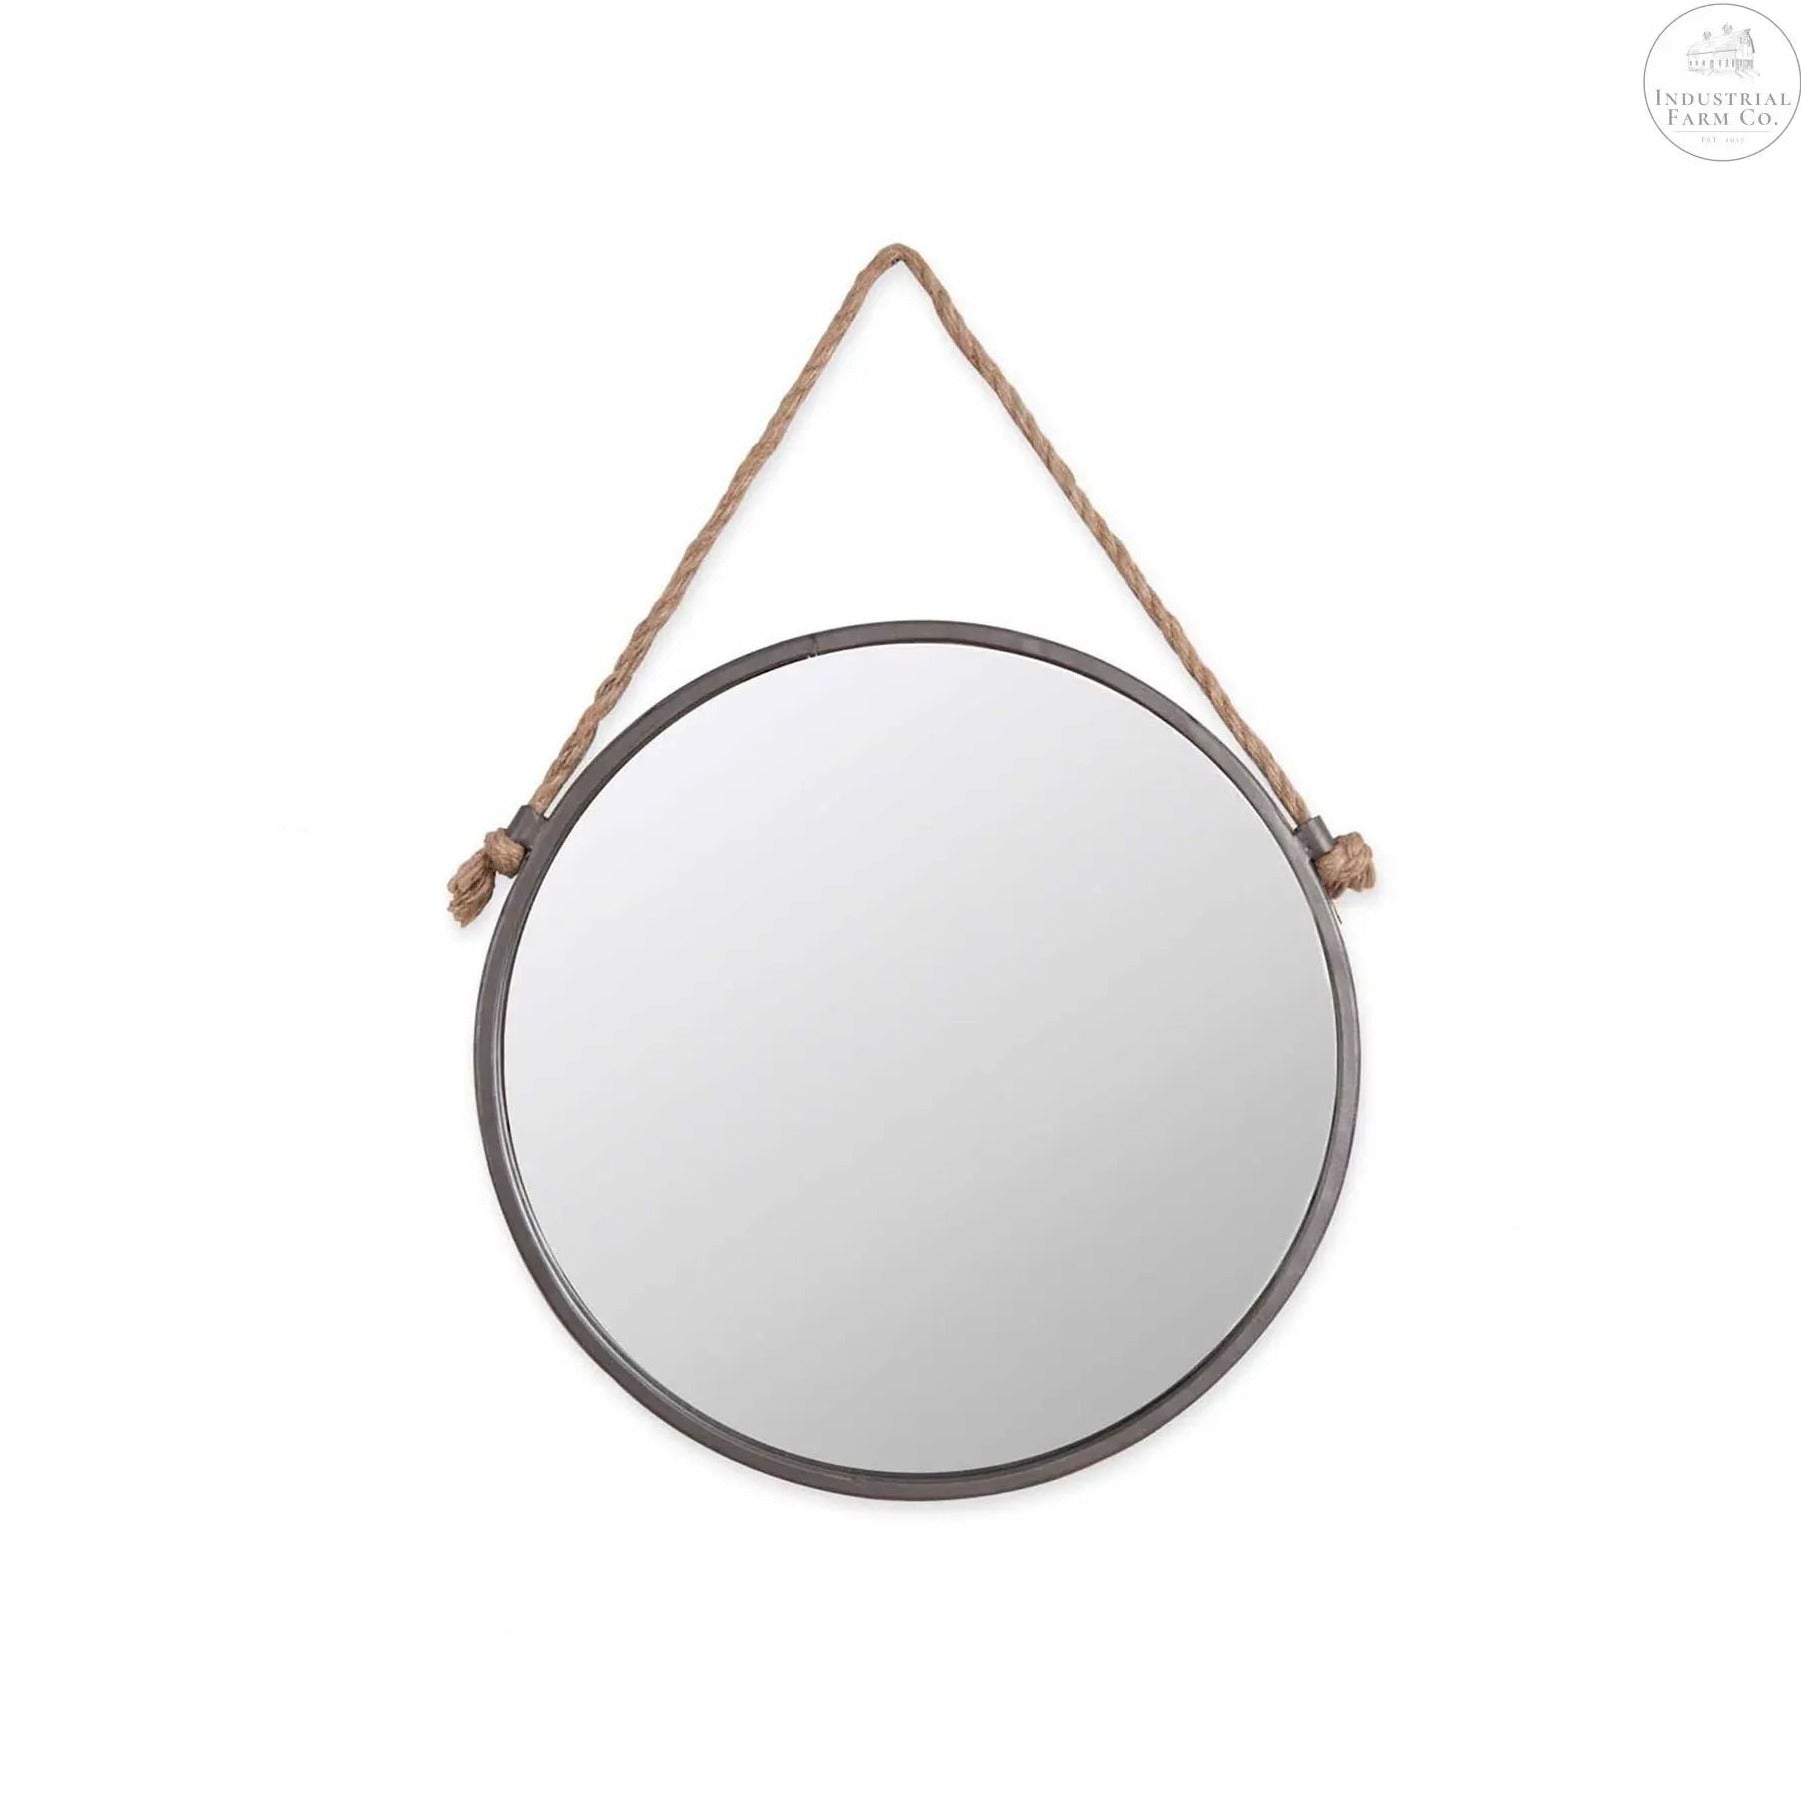 Classic Style by the Sea Mirror     | Industrial Farm Co